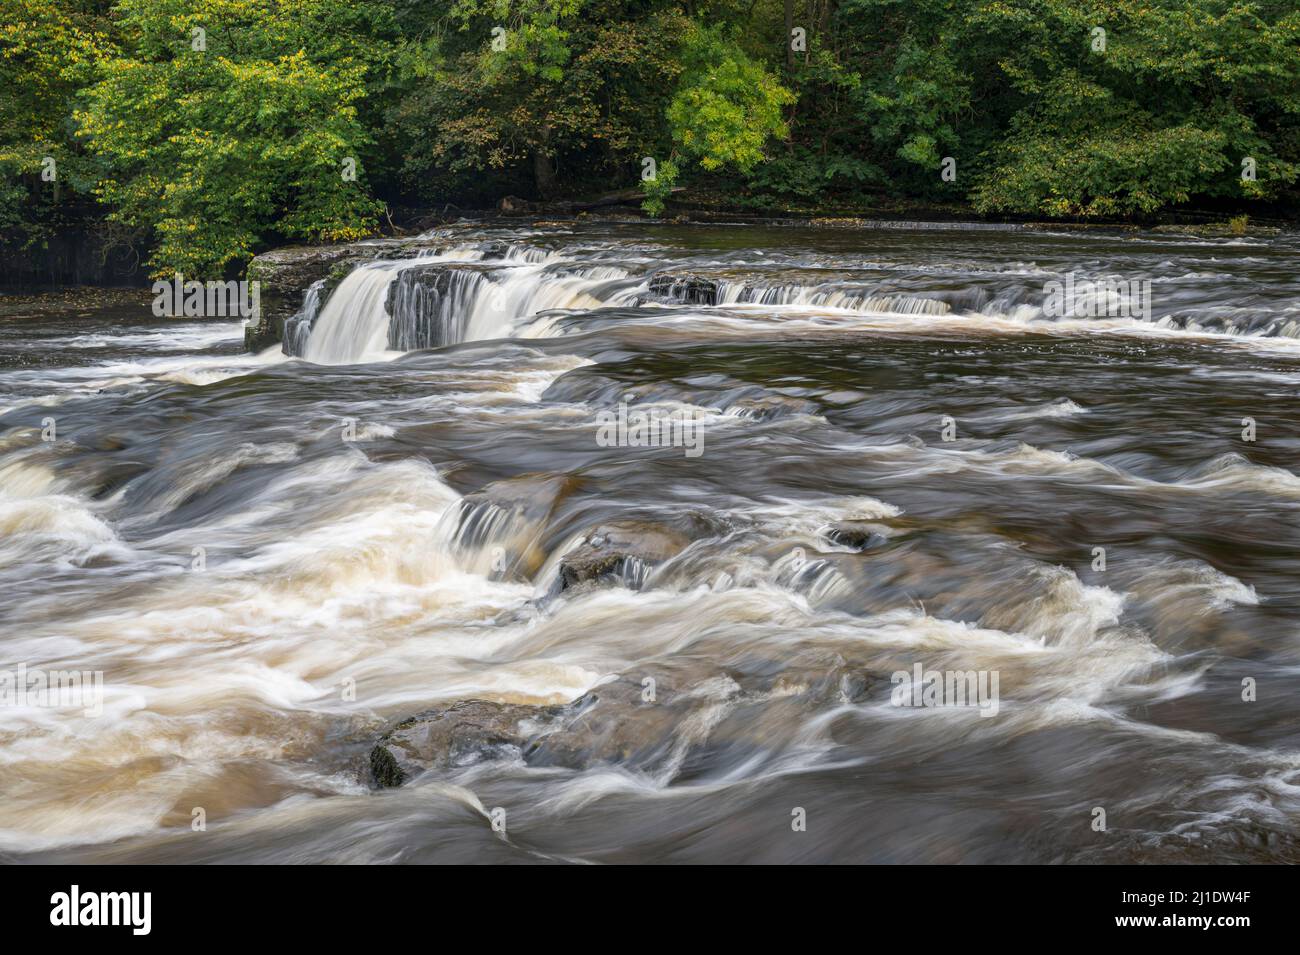 The upper falls of the River Ure at Aysgarth, Yorkshire Dales National Park, England Stock Photo